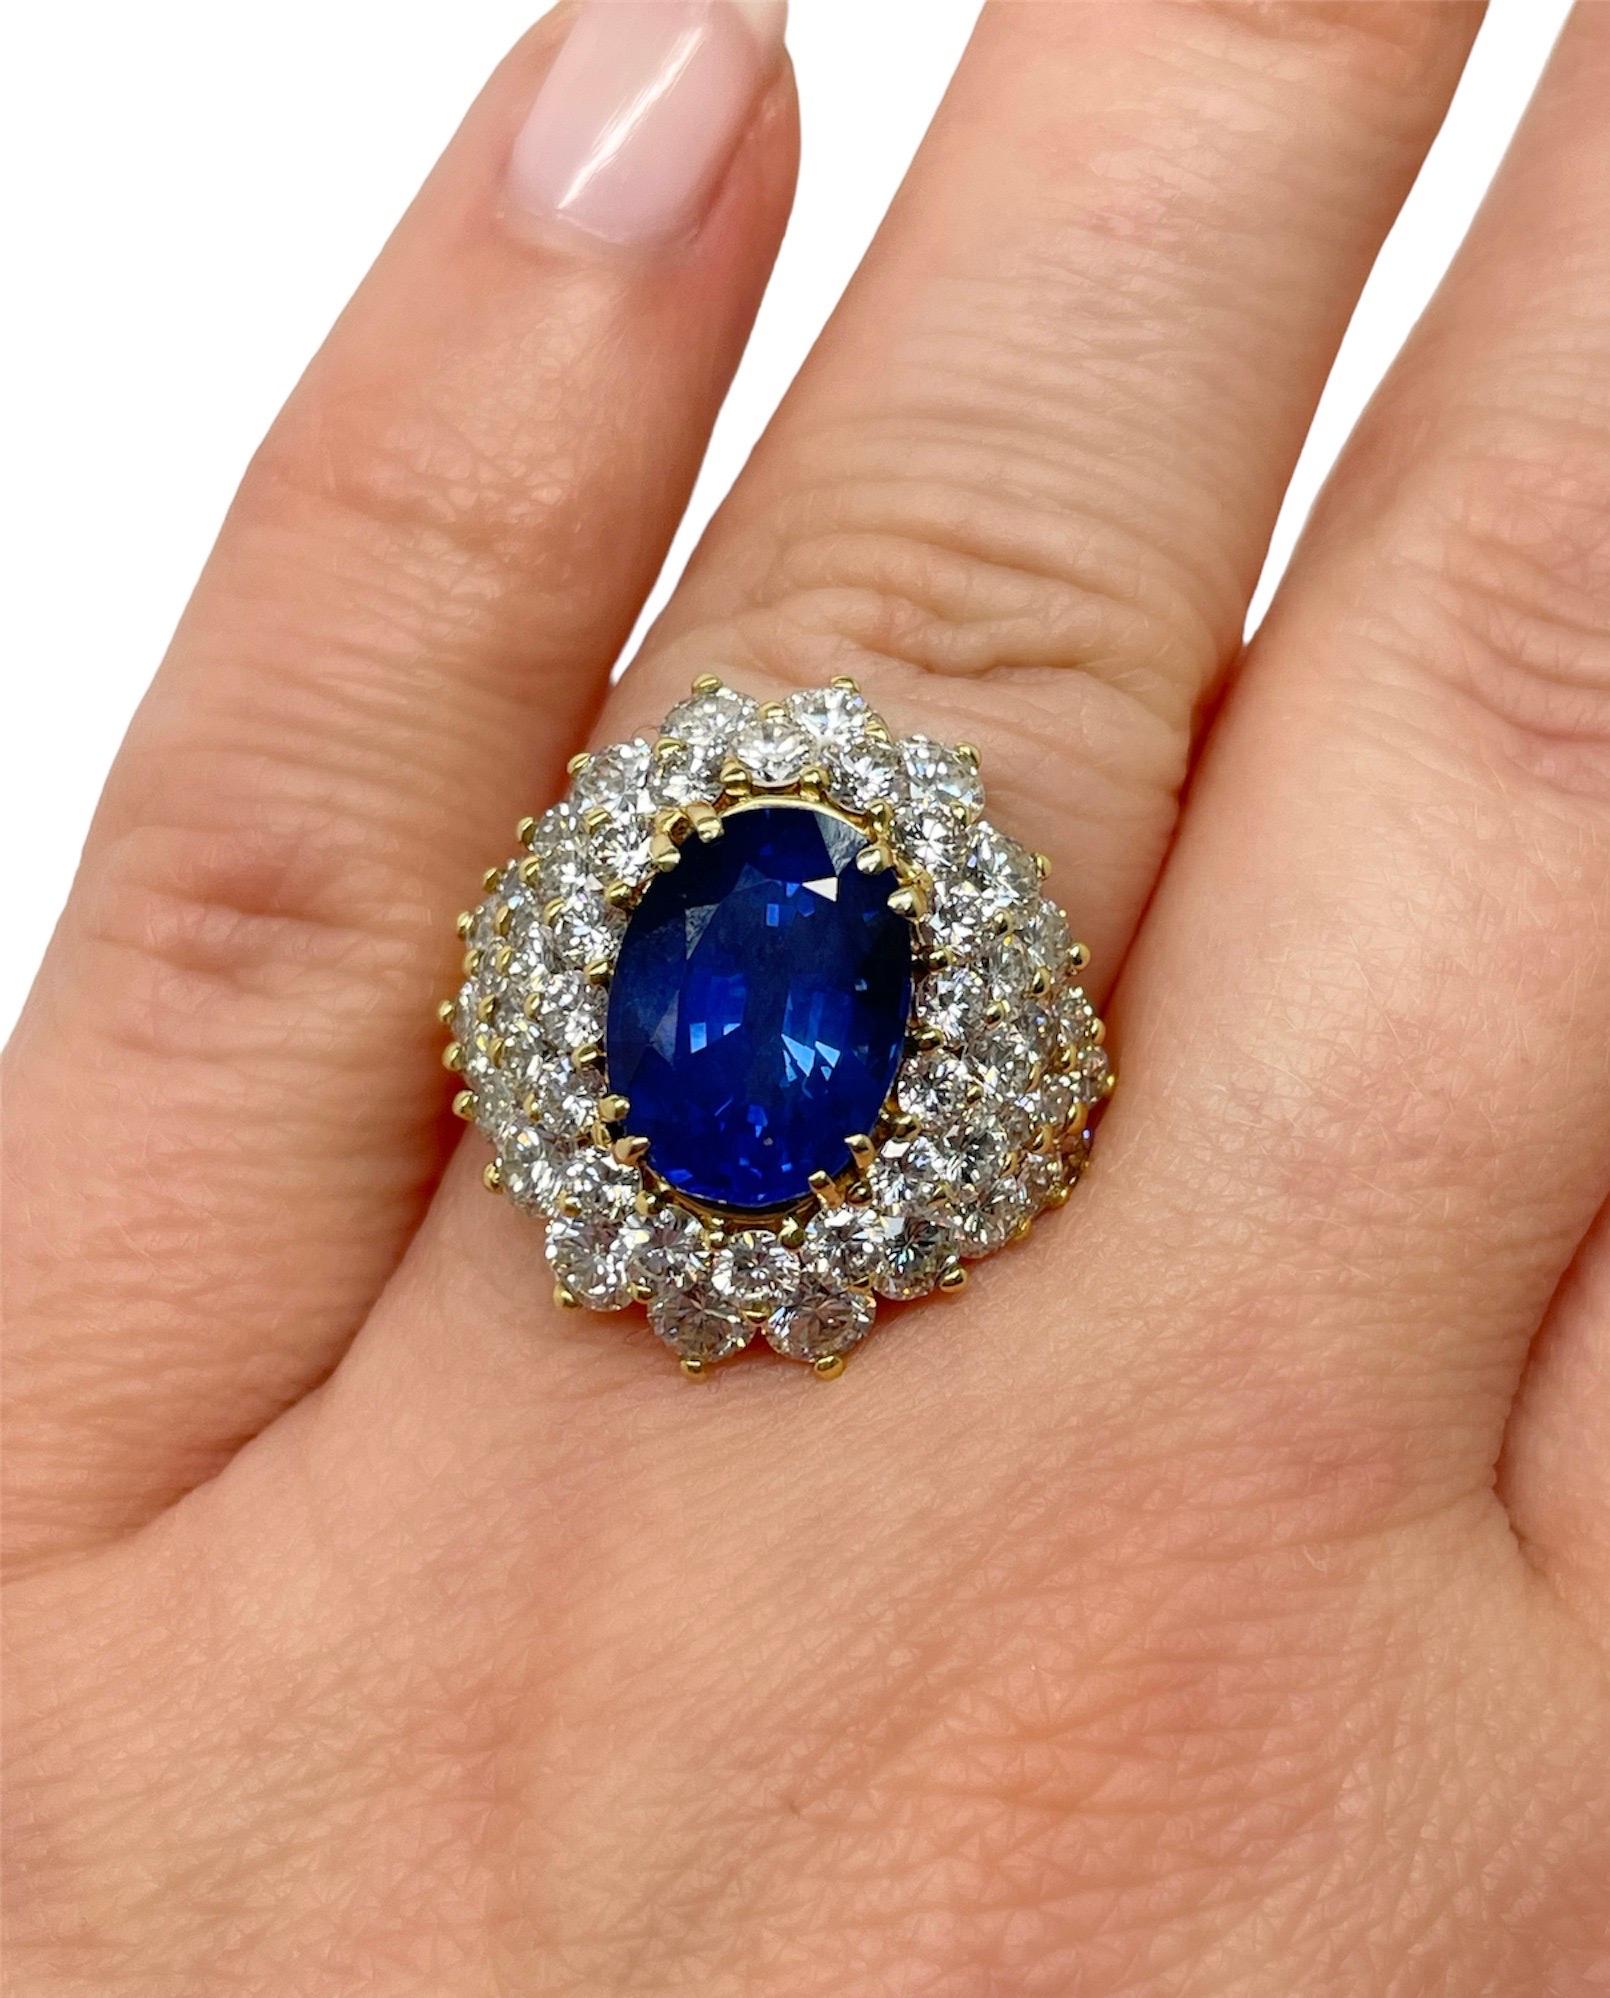 Oval Cut GIA Certified 5.82 Carat Ceylon Sapphire and Diamond Cocktail Ring For Sale